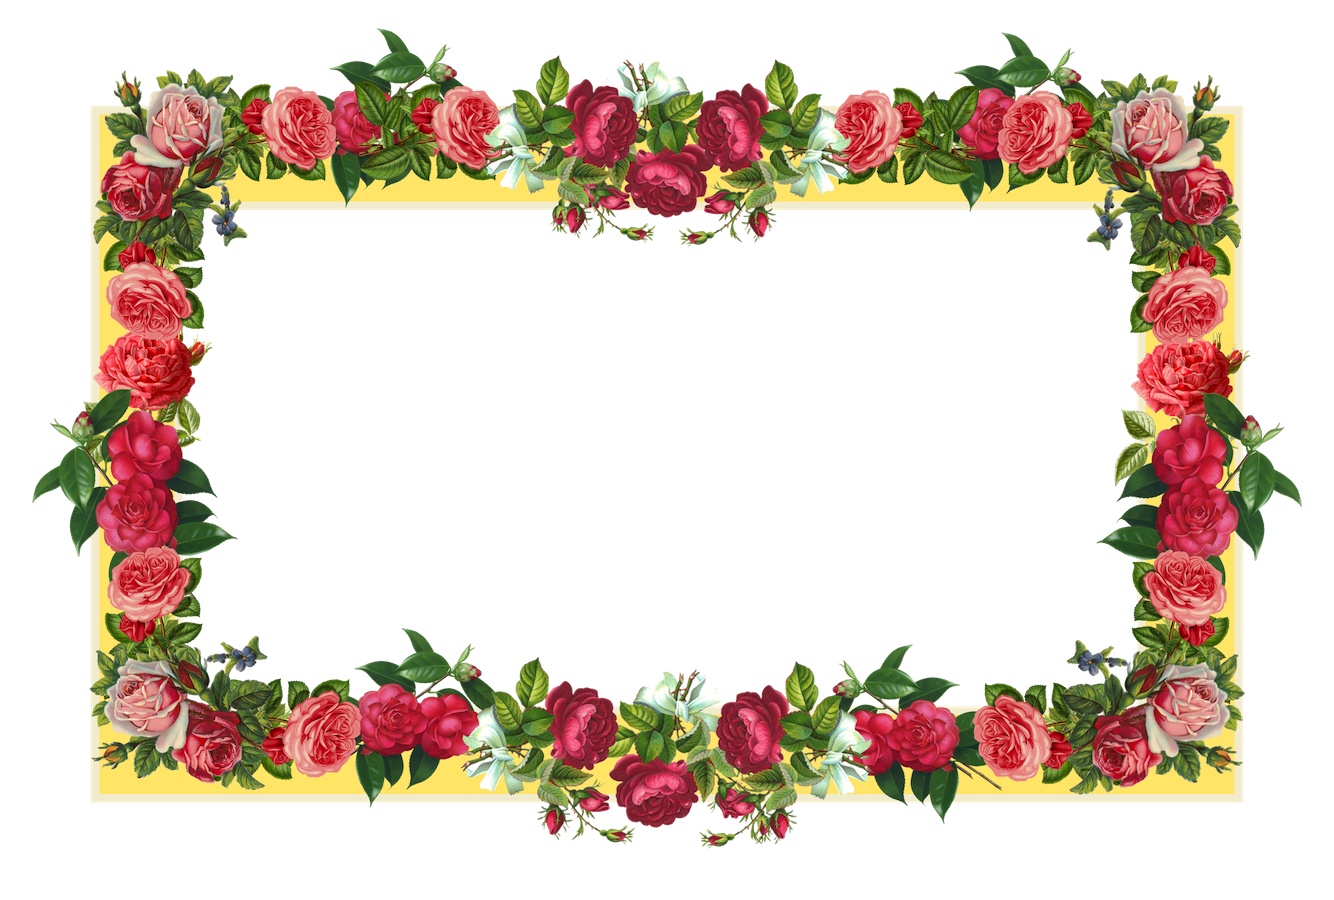 Flowers Borders PNG Images